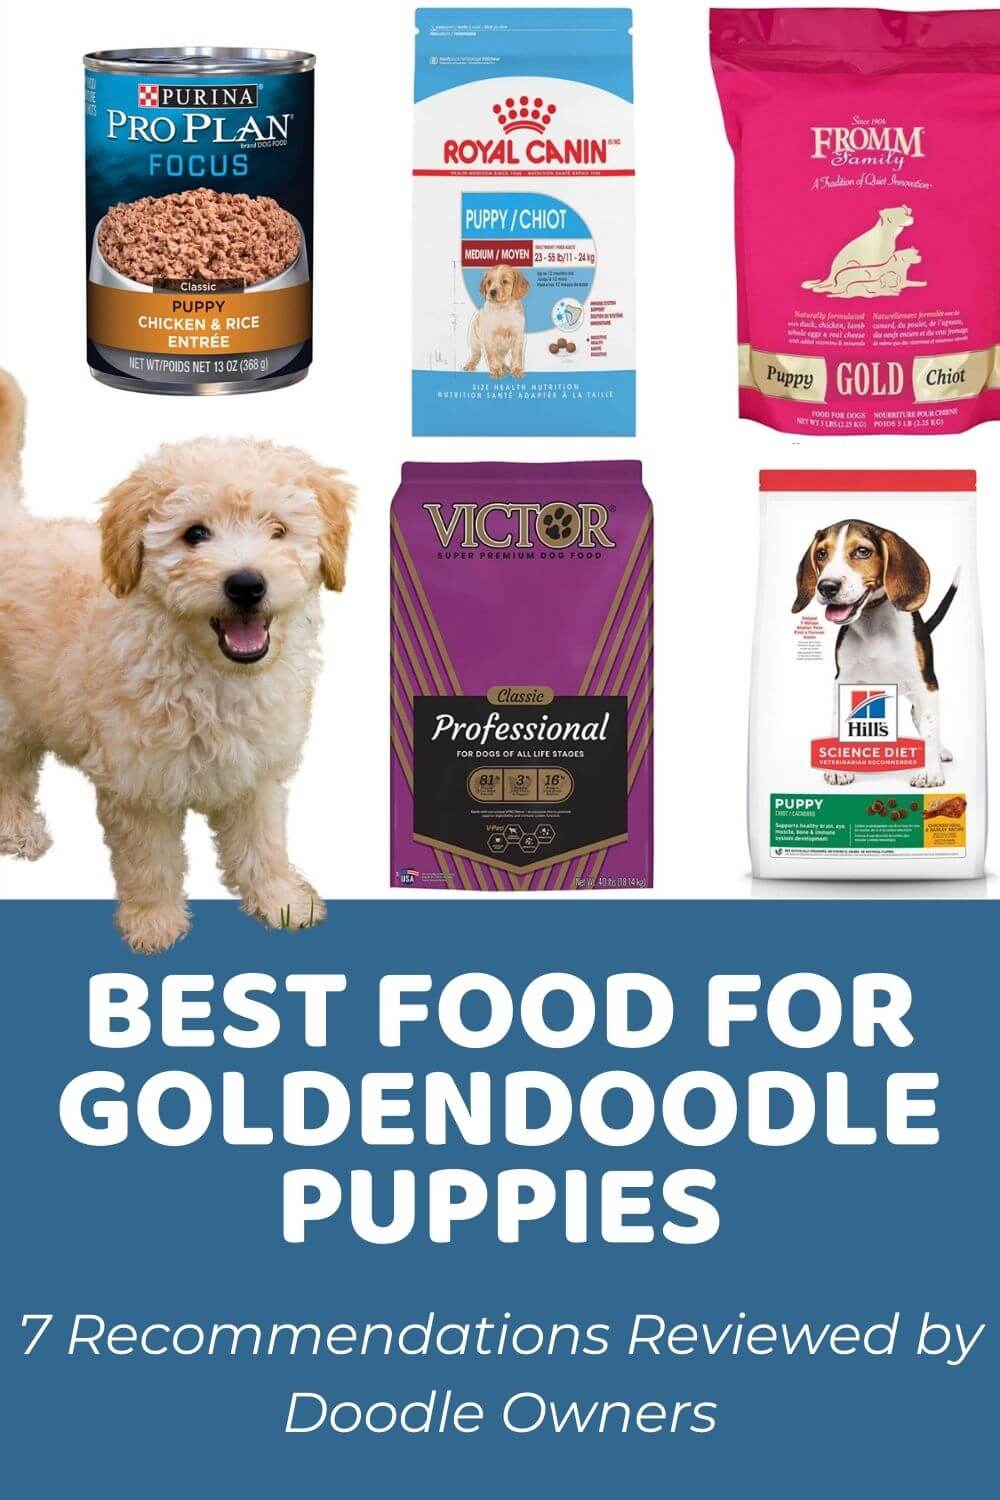 Best Goldendoodle Puppy Food - Reviews from Doodle Owners!